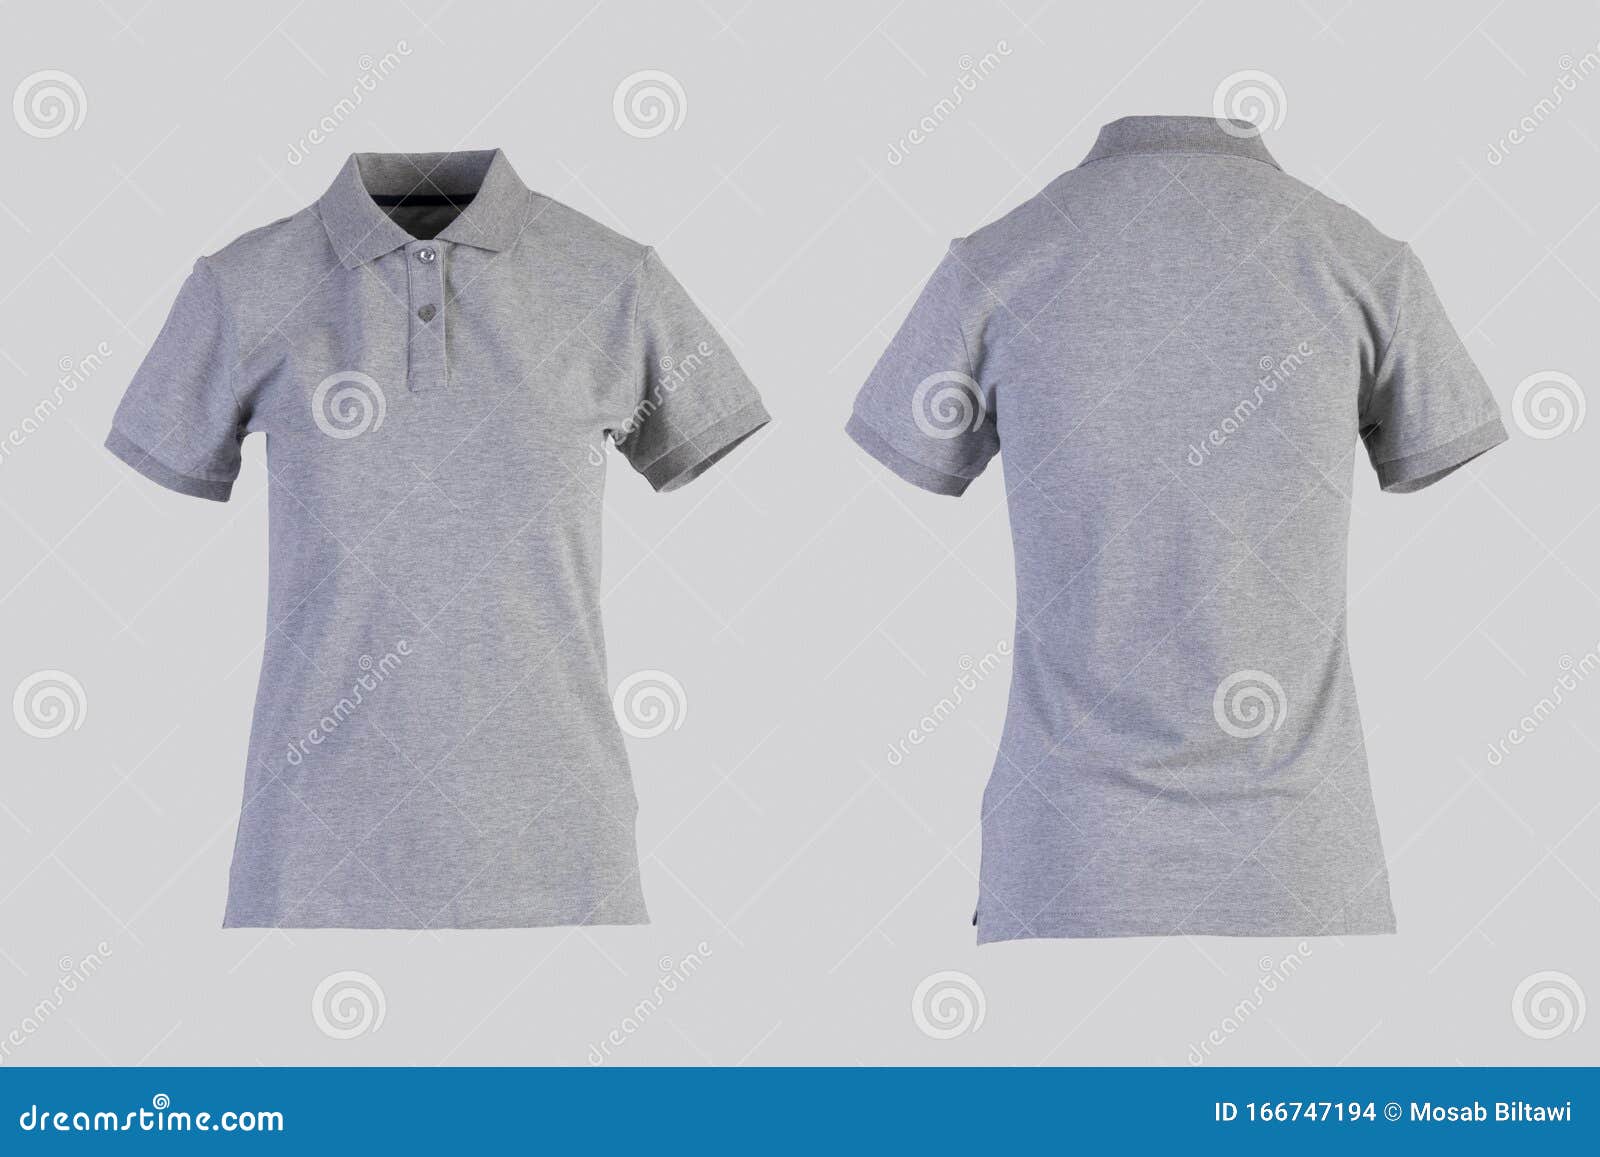 Gray Womens Blank Polo Shirt, Front and Back View Isolated on White ...